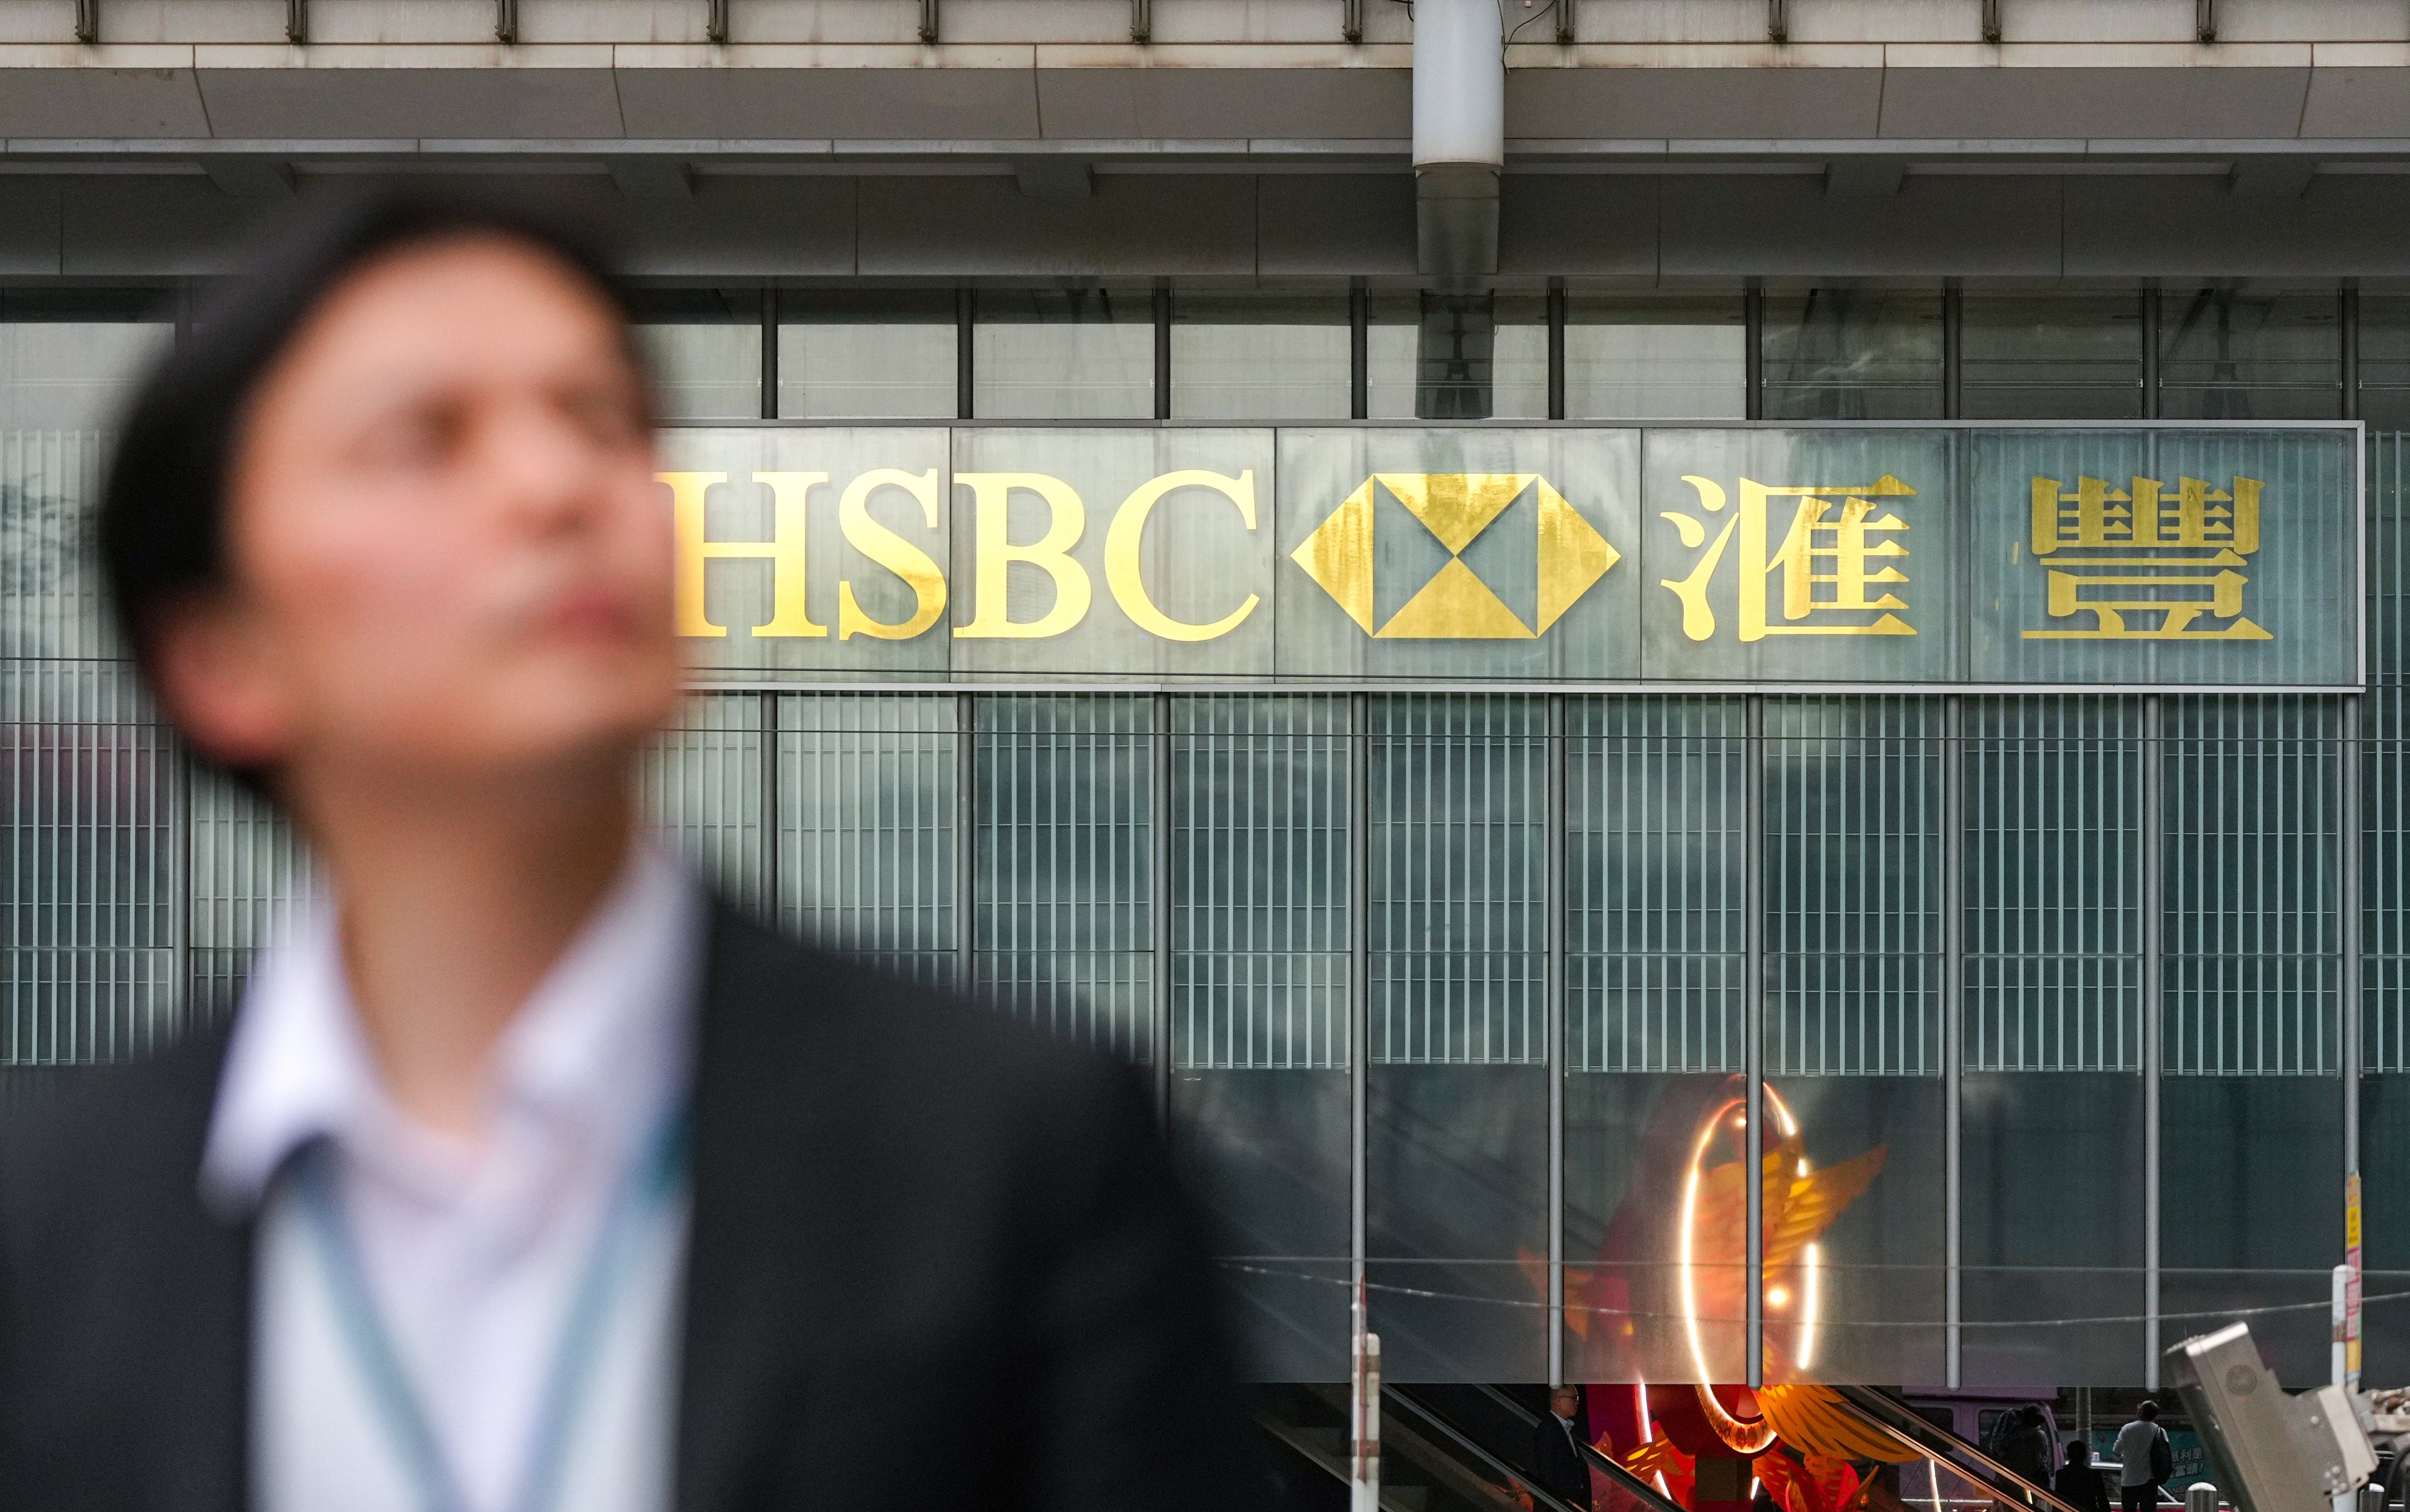 HSBC surpassed first-quarter profit estimates thanks to a one-off gain from the sale of its Canadian business. Photo: Eugene Lee